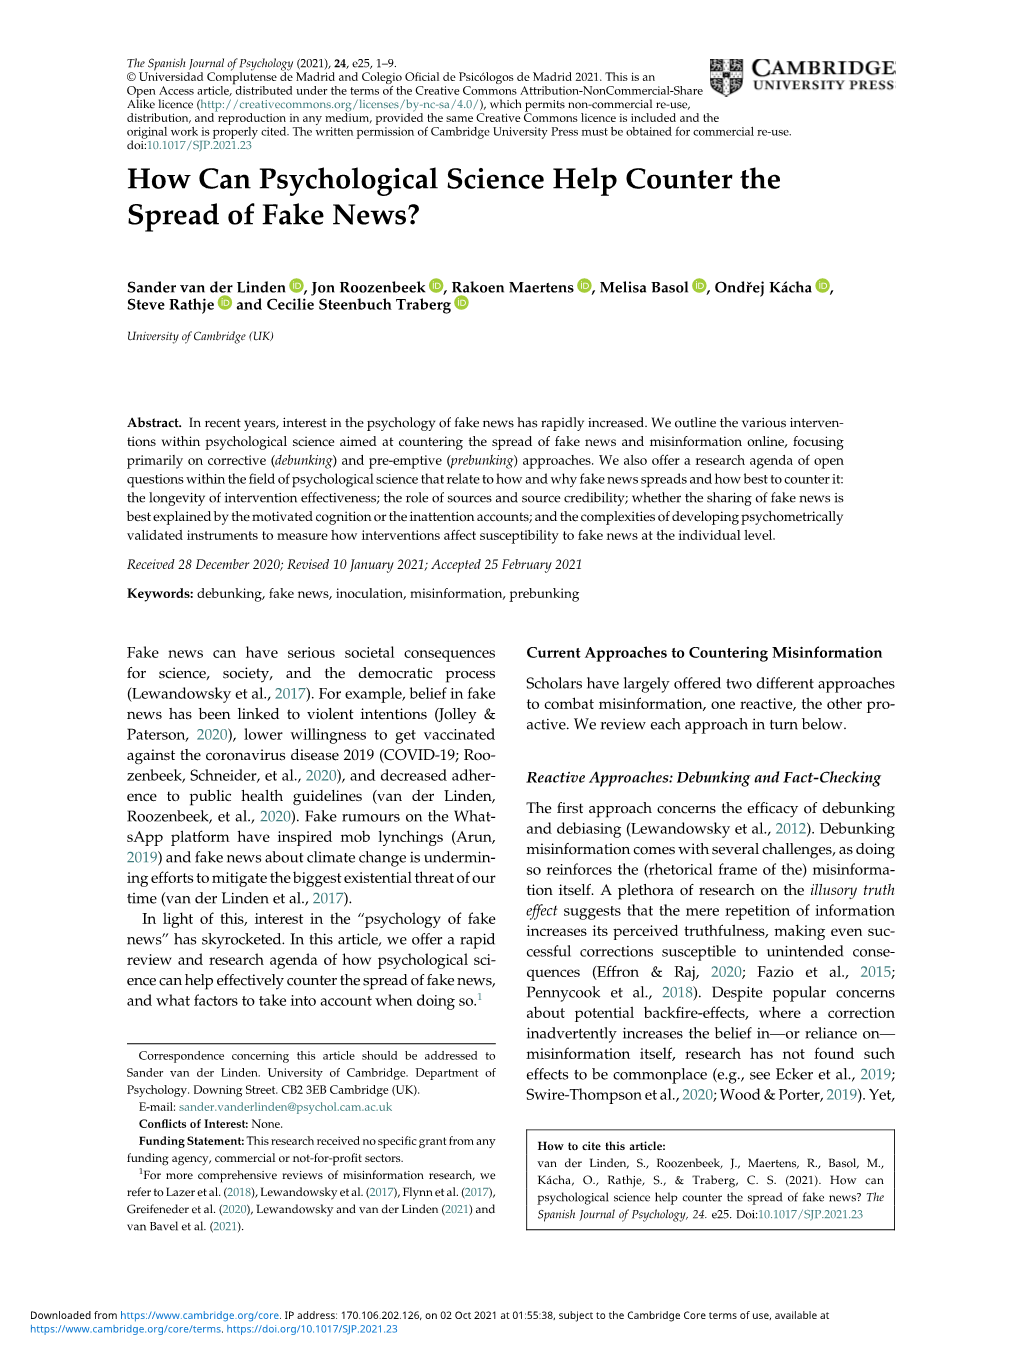 How Can Psychological Science Help Counter the Spread of Fake News?